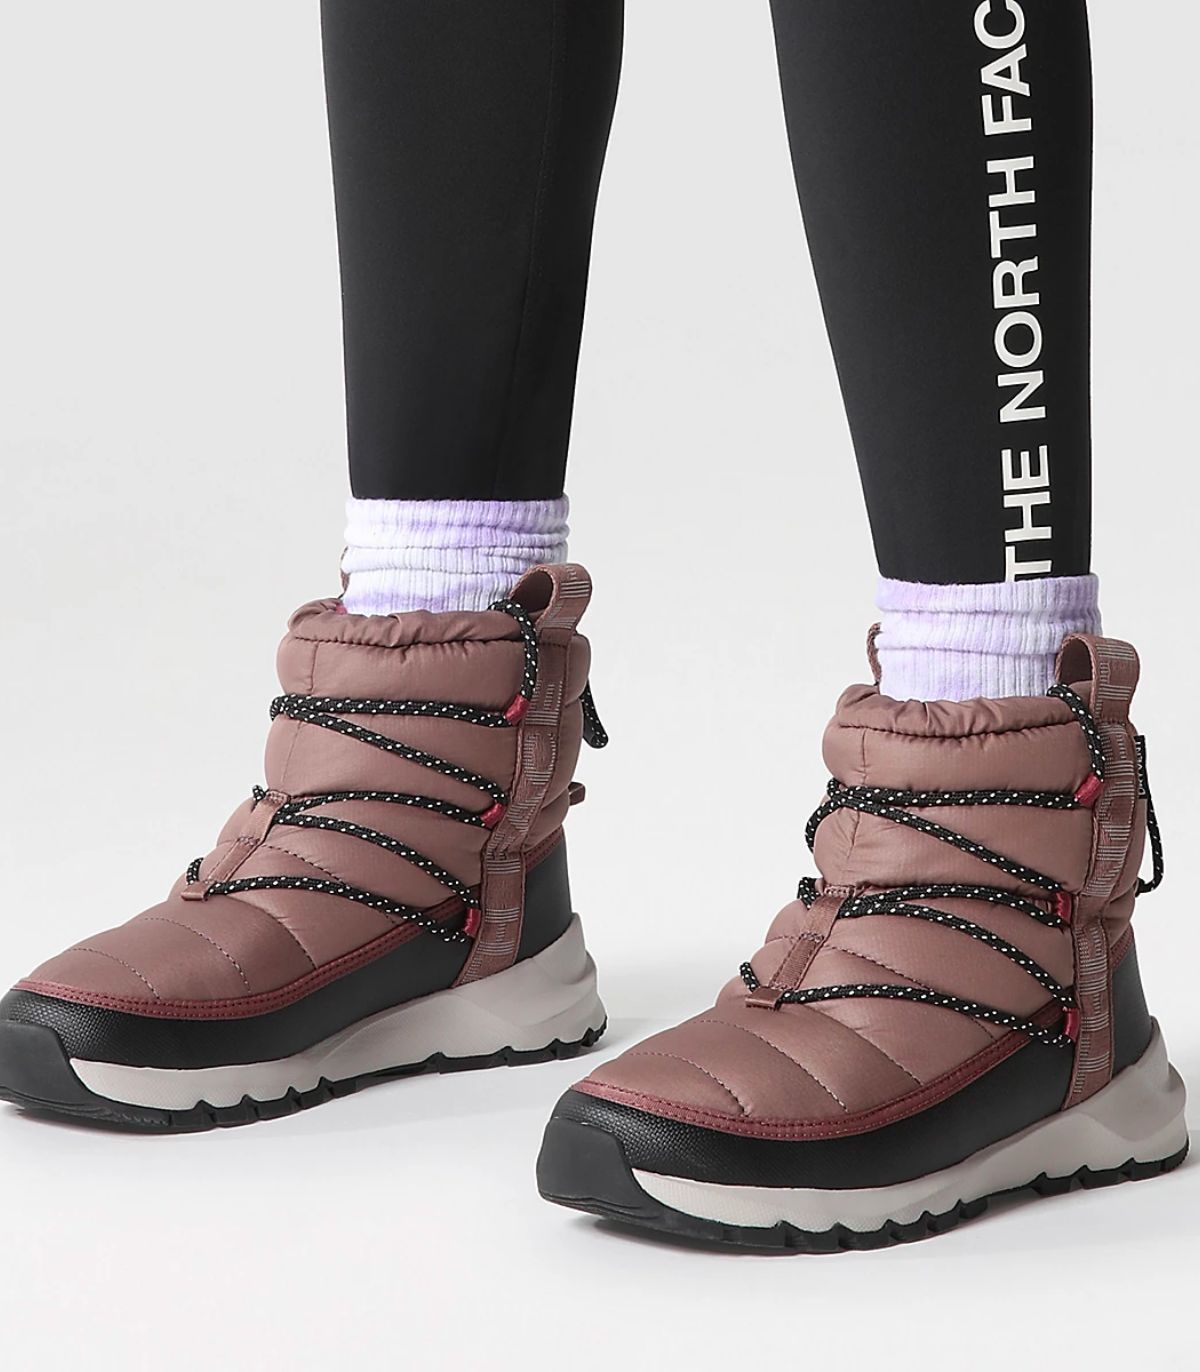 Botas The North Thermoball Lace Up Mujer Deep Taupe. Oferta comprar.